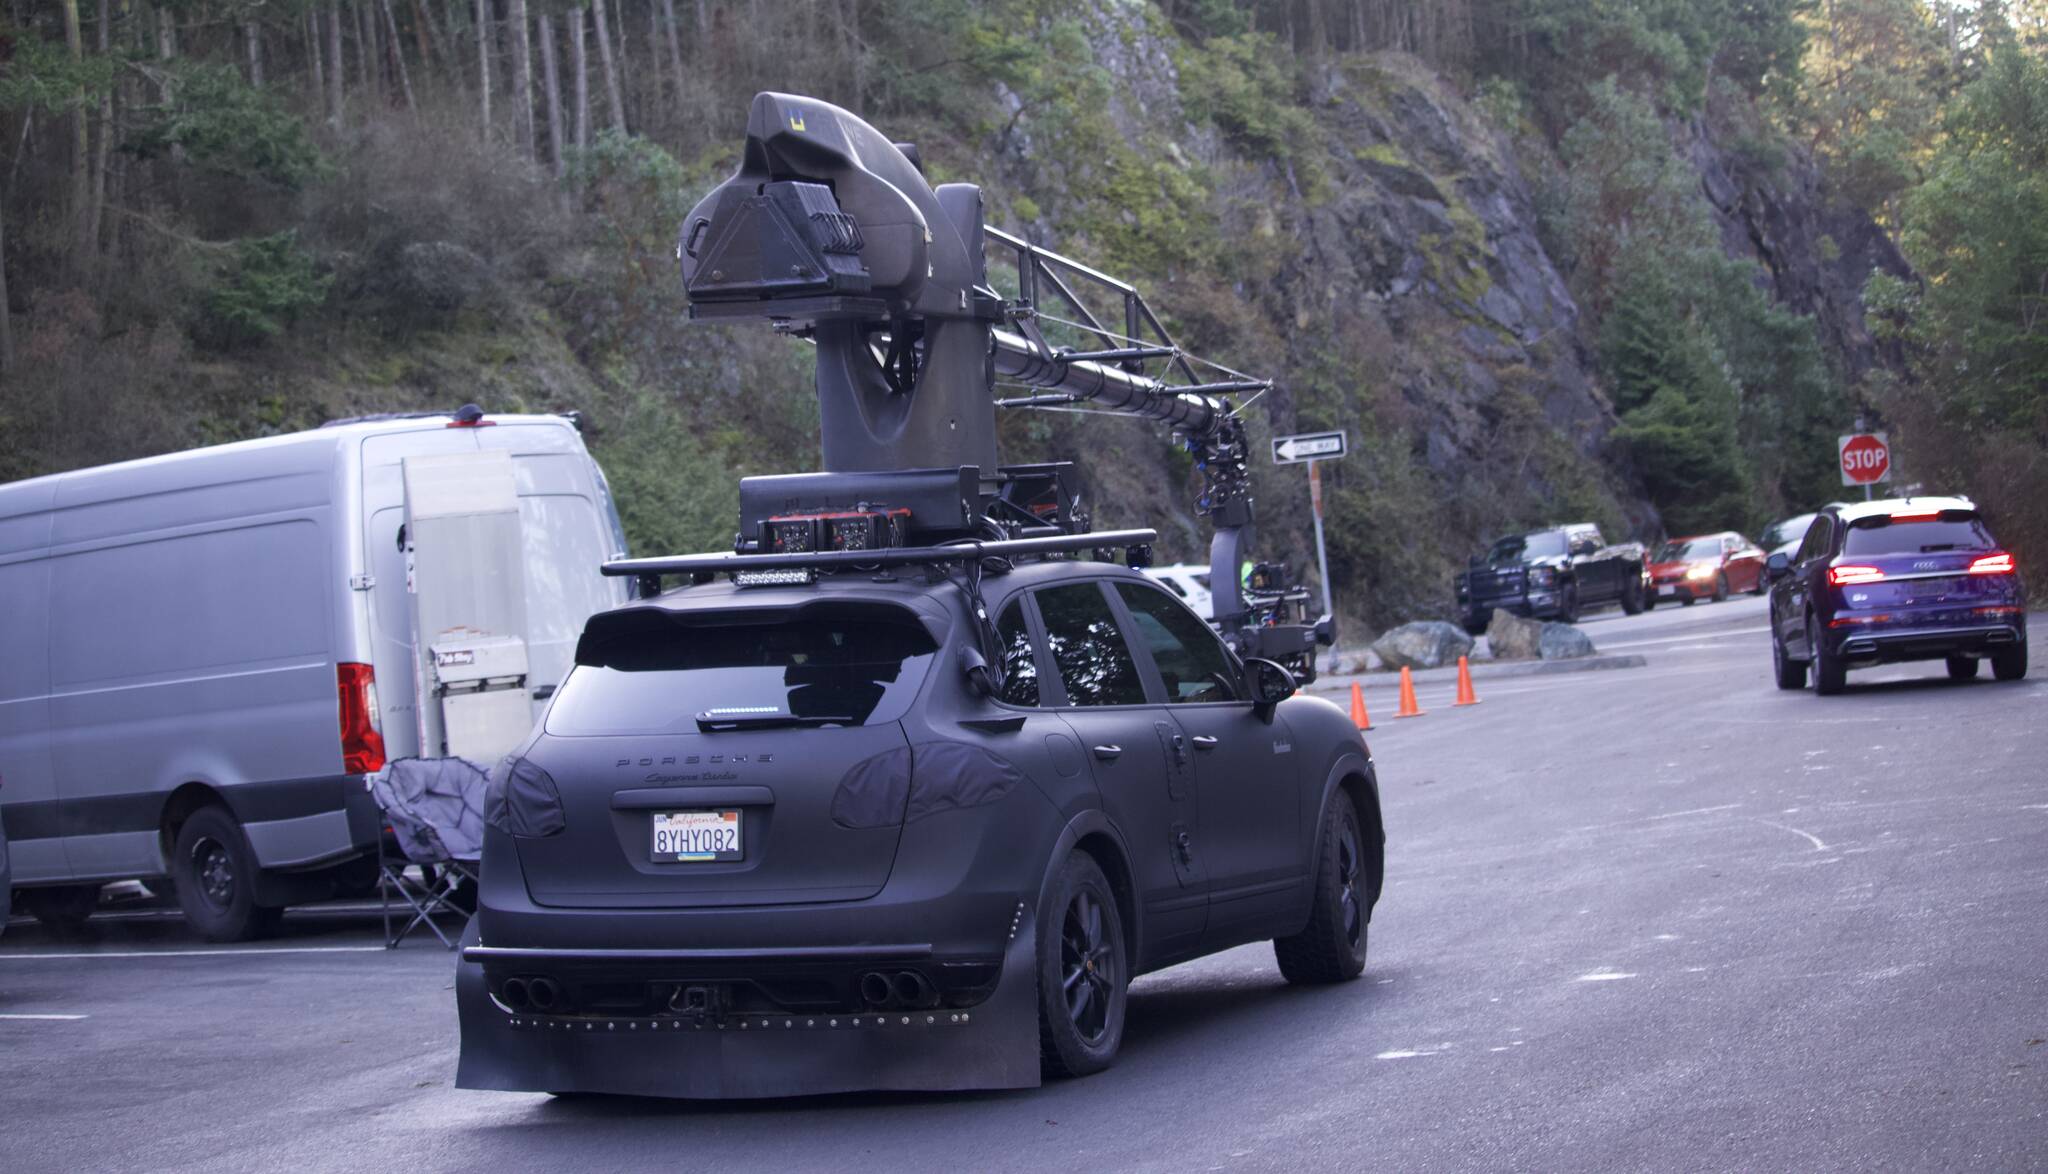 Photo by Rachel Rosen/Whidbey News-Times
The car mounted with a crane and camera films an Audi for a commercial shot at Deception Pass Bridge.